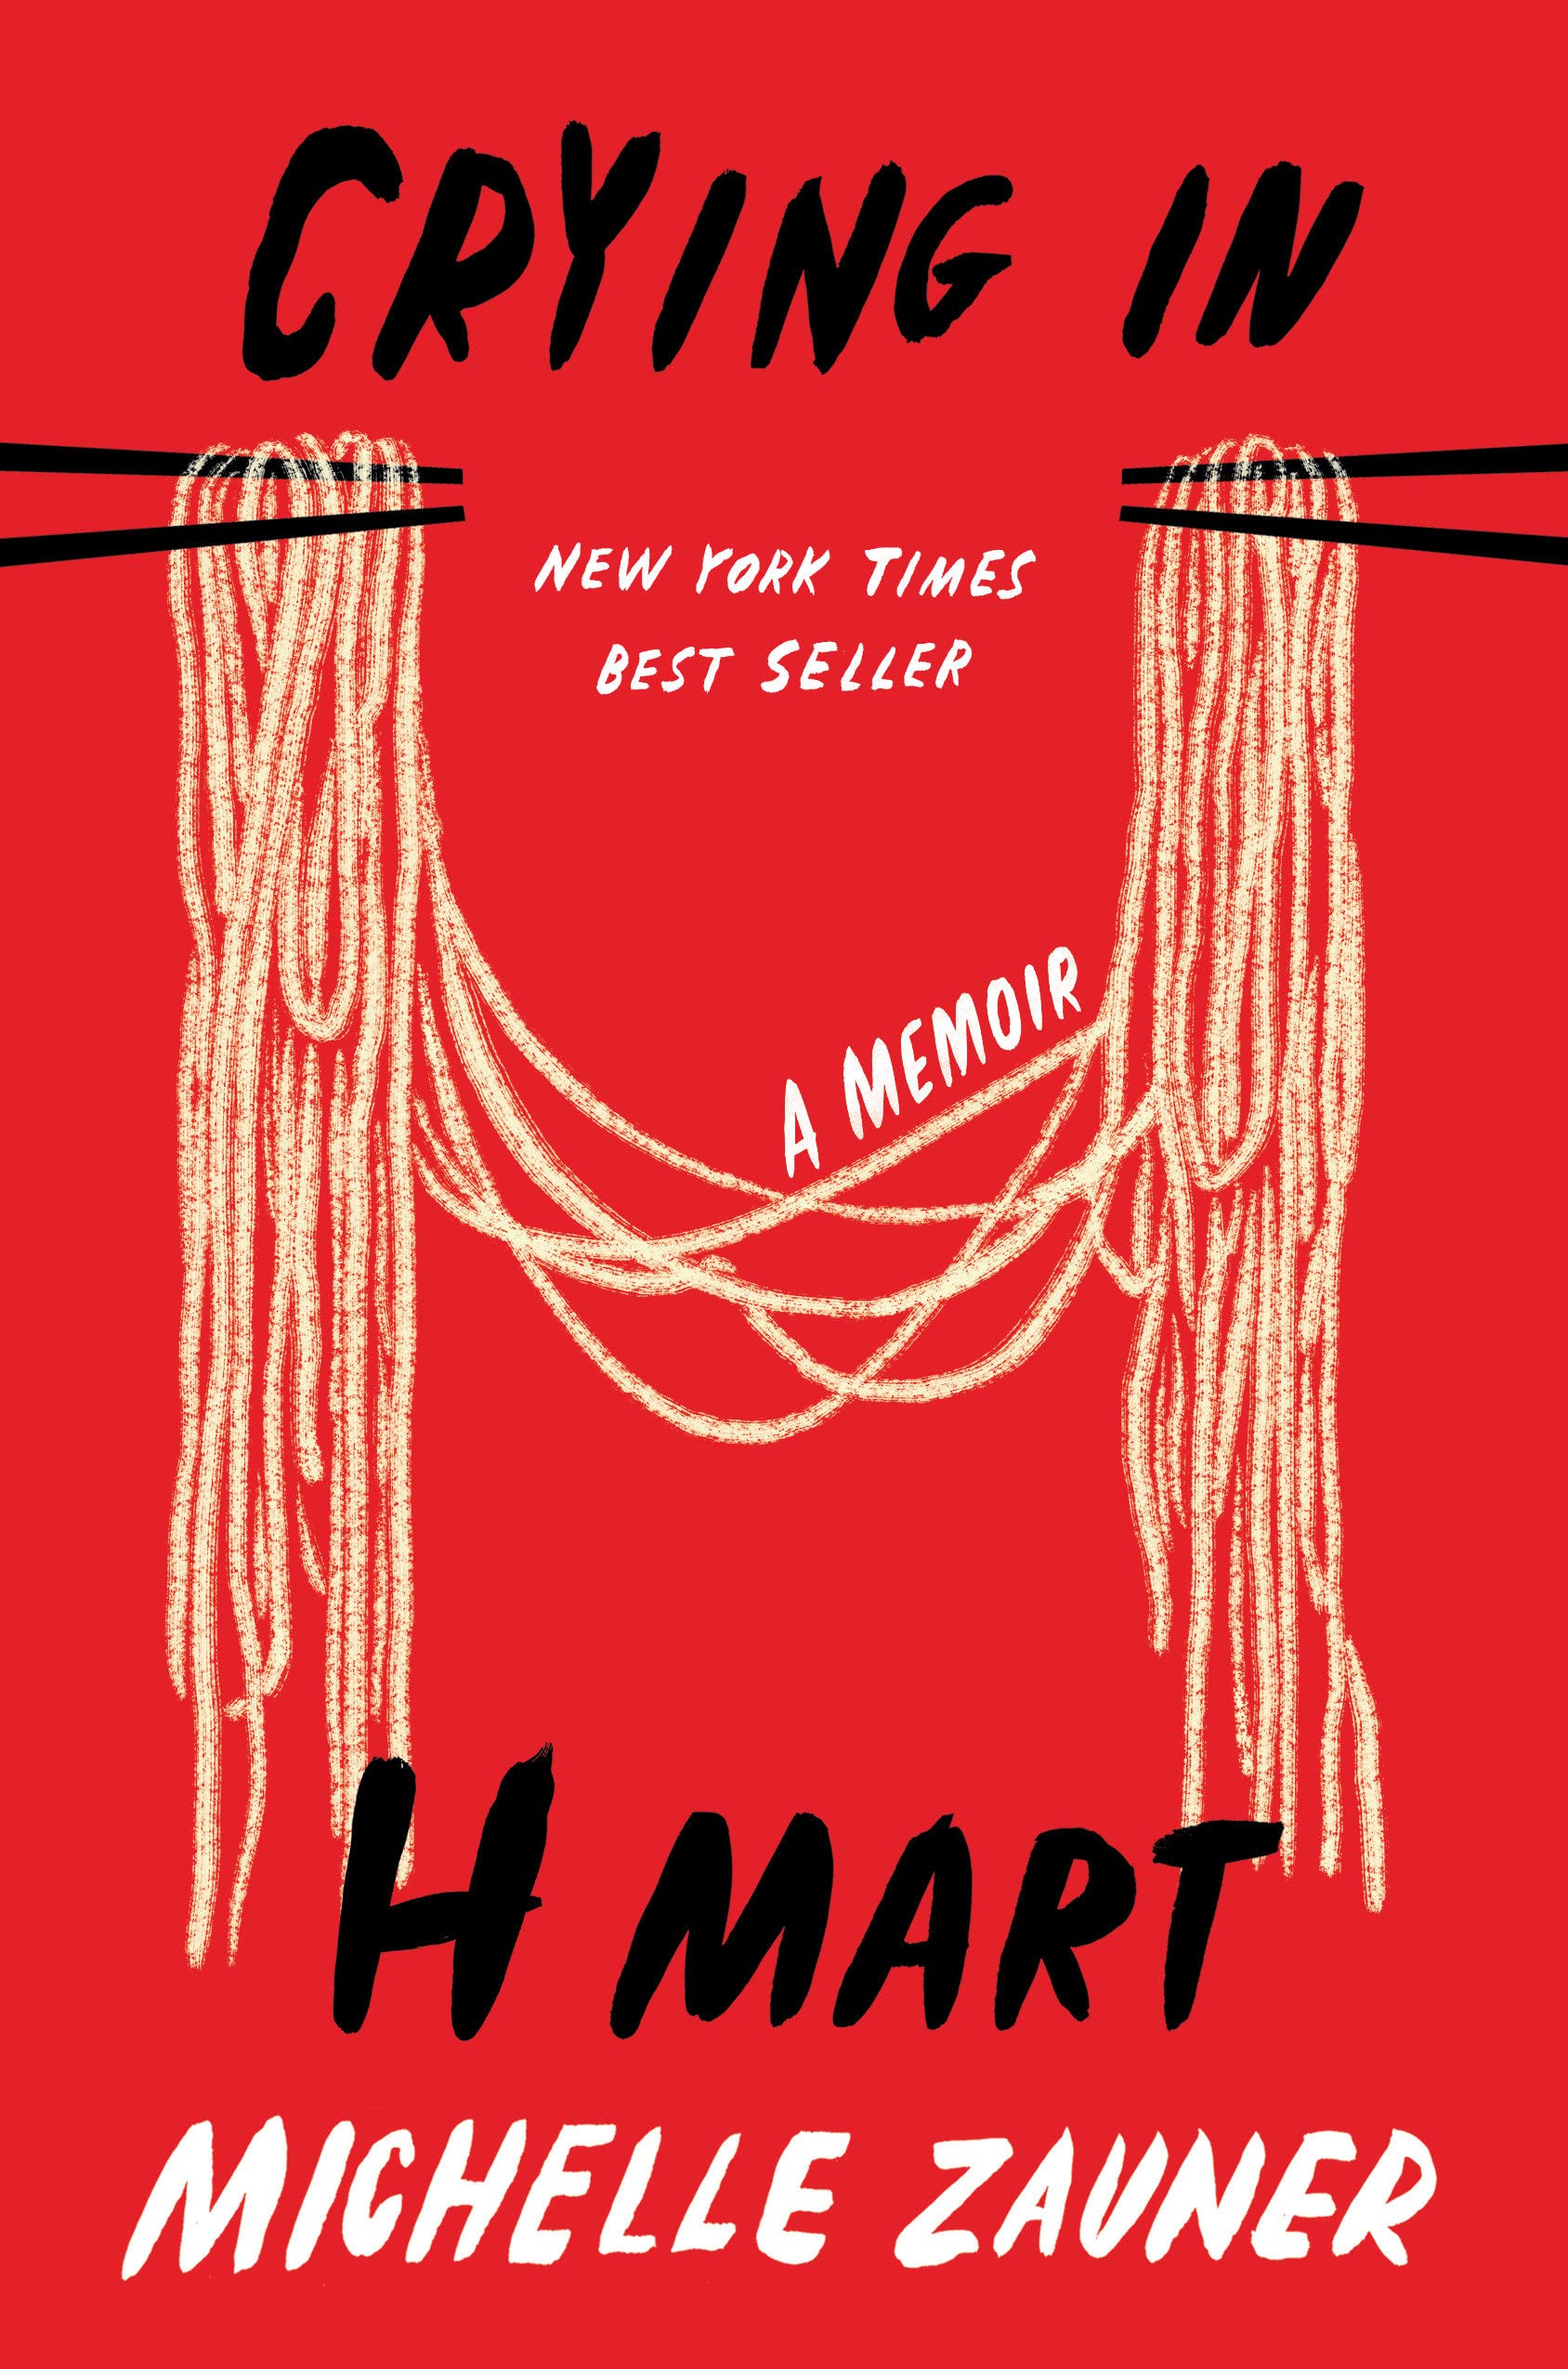 Image of the cover of the book Crying in H Mart by Michelle Zauner